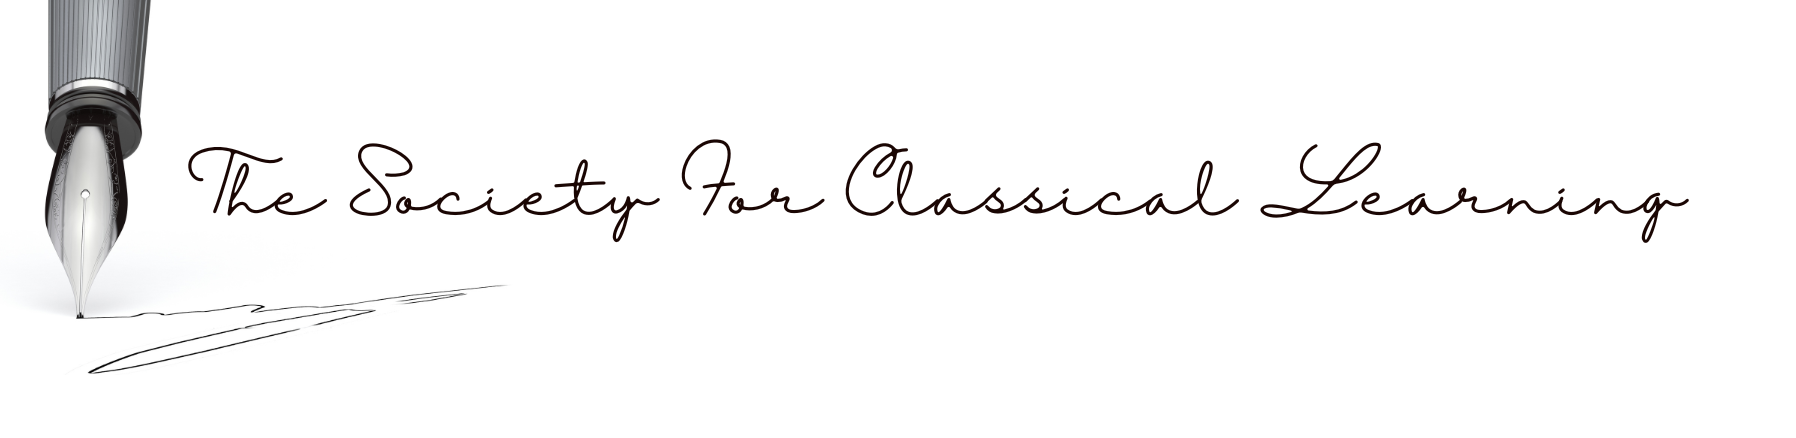 The Society For Classical Learning | FCS Blog Post